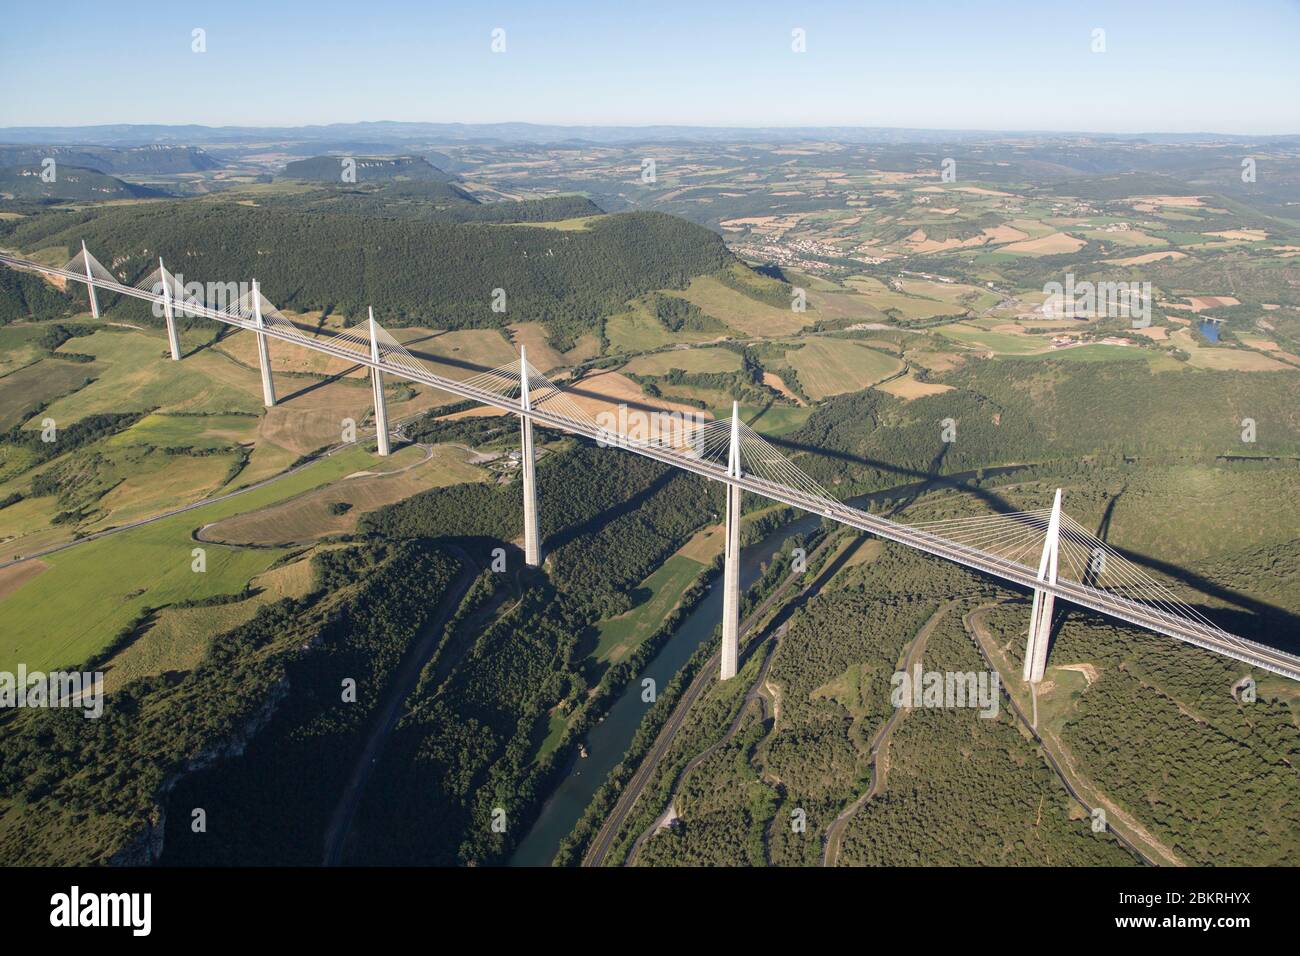 France, Aveyron, Grands Causses regional natural park, Millau viaduct, architects Michel Virlogeux and Norman Foster, between Causse du Larzac and Causse de Sauveterre above the Tarn (aerial view) Stock Photo